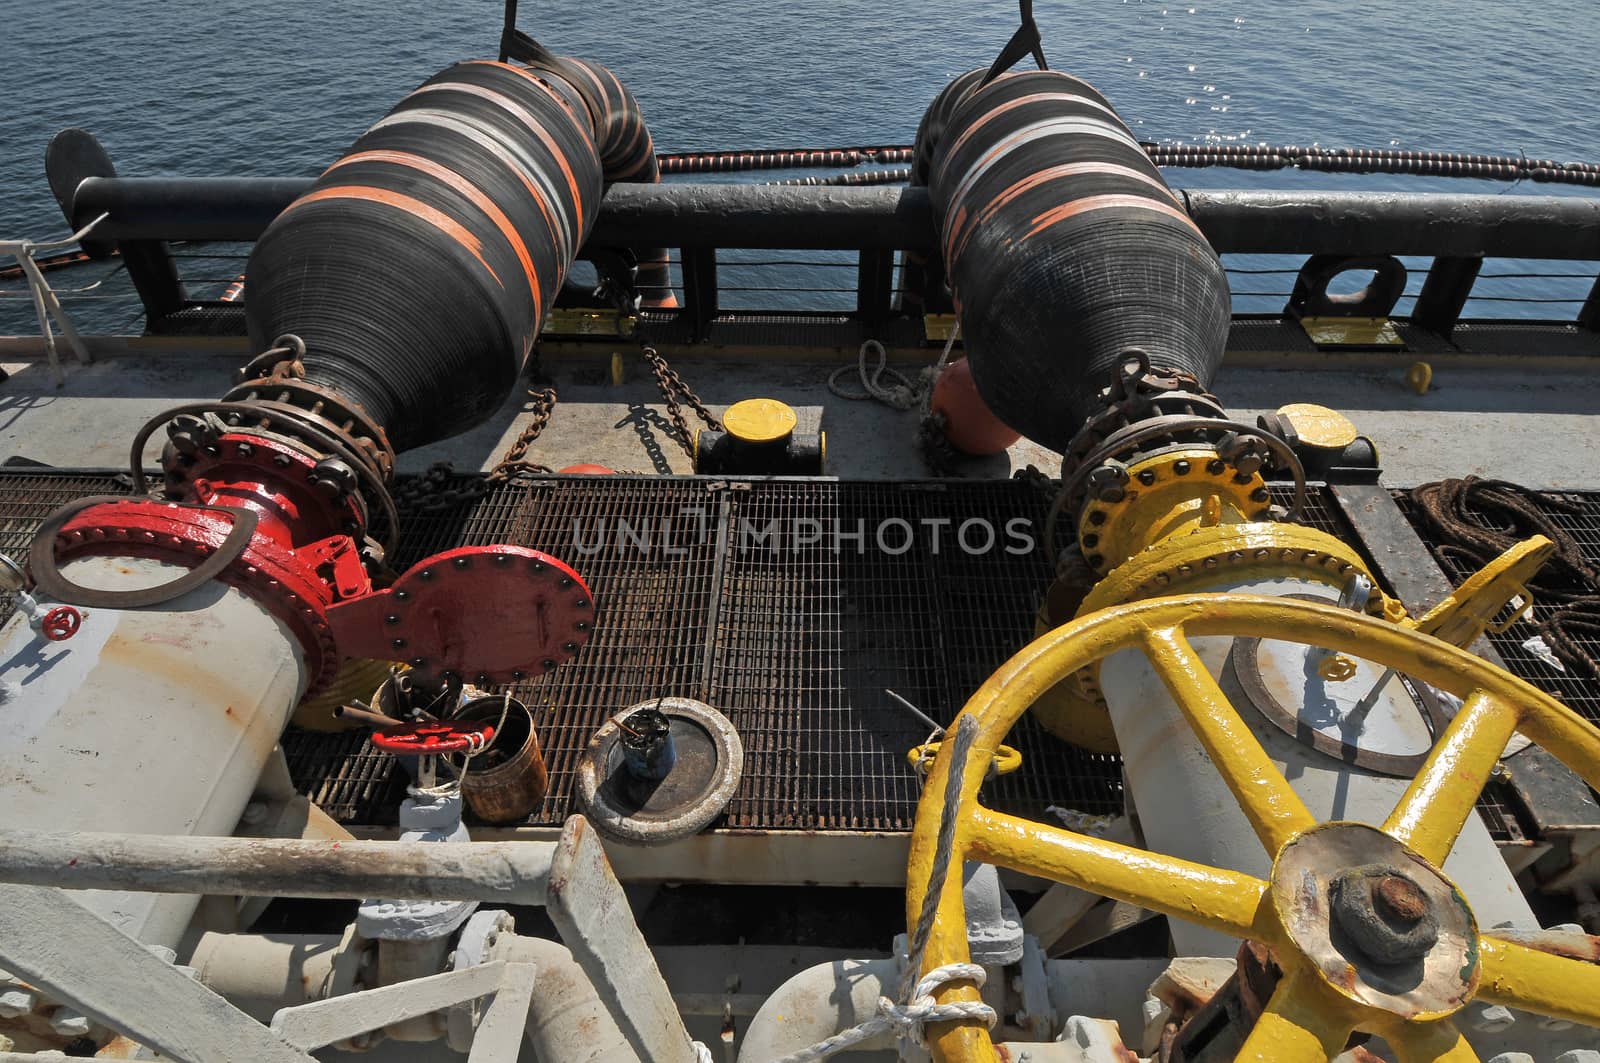 Oil and gas transfer platforms